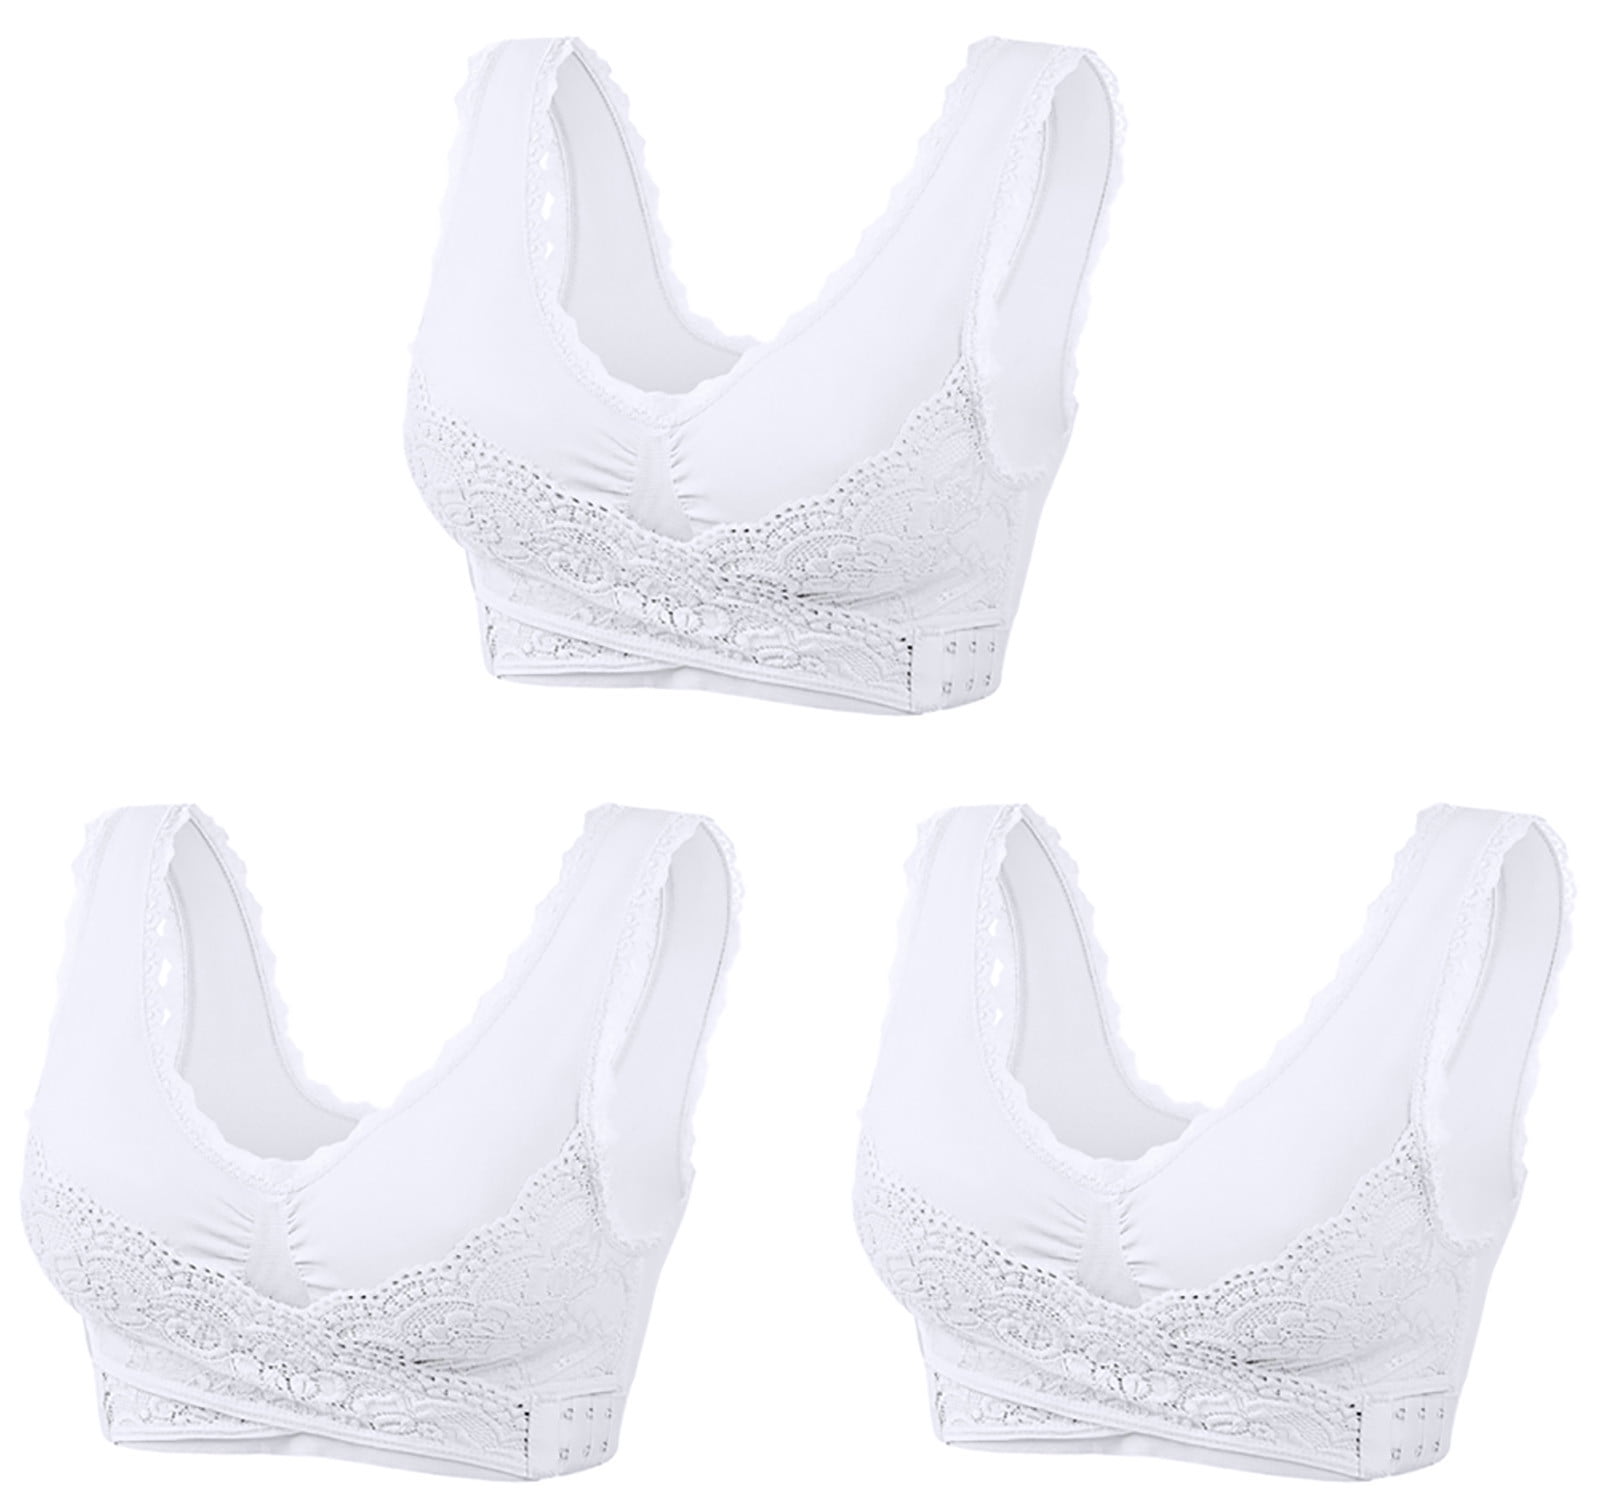 Lastesso Kendally Bra, Kendally Bras for Older Women Front Closure Lace  Bras High Support No Underwire Bralettes Everyday Wear